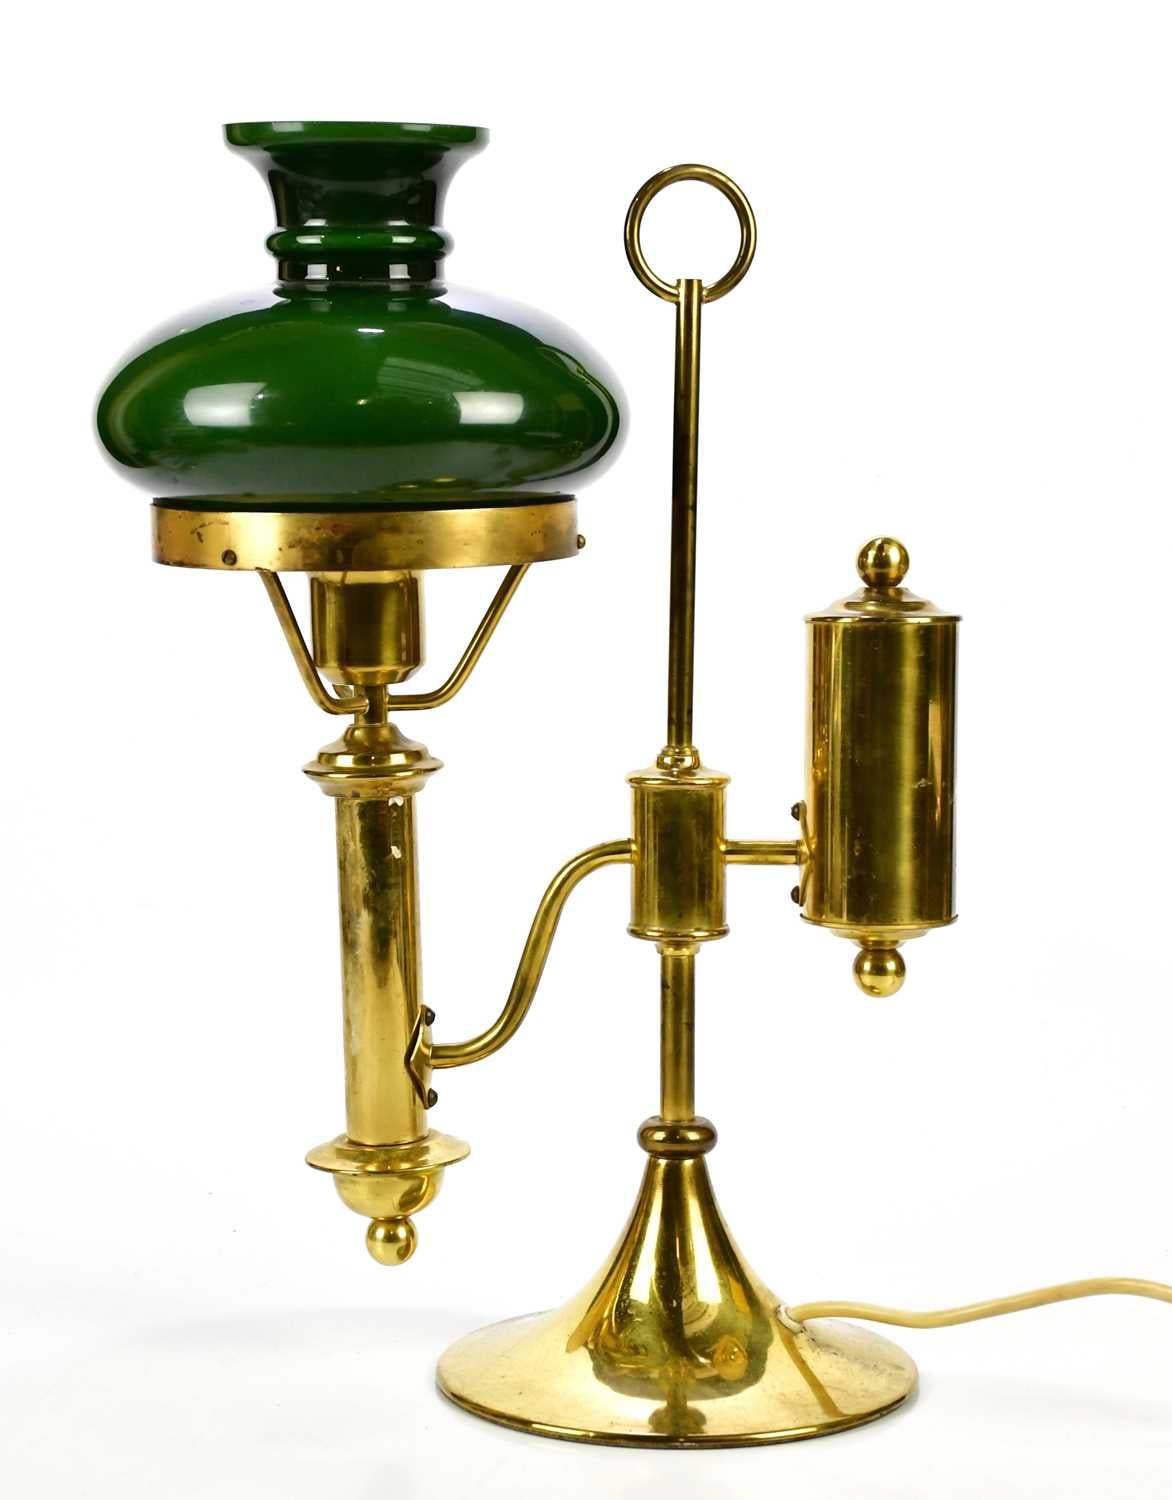 Late 19th Century Brass Adjustable Student Reading Lamp with Racing Green Ceramic Shade 

Reworked For Modern Day Use with a UK three pin plug.

A timeless design classic suitable for an antique or modern day desk.